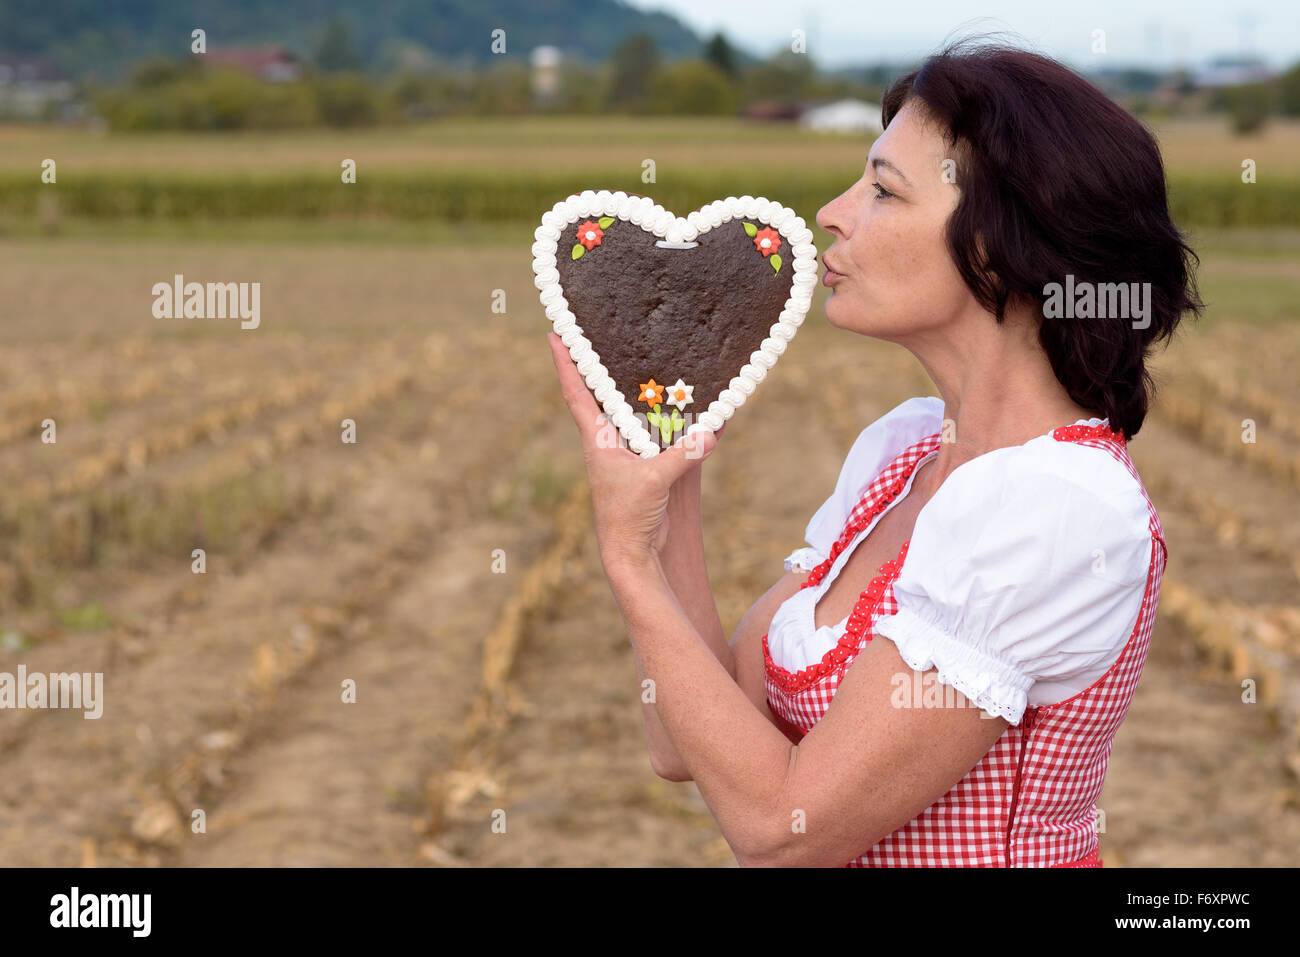 https://c8.alamy.com/comp/F6XPWC/attractive-young-bavarian-woman-wearing-a-traditional-red-dirndl-standing-F6XPWC.jpg